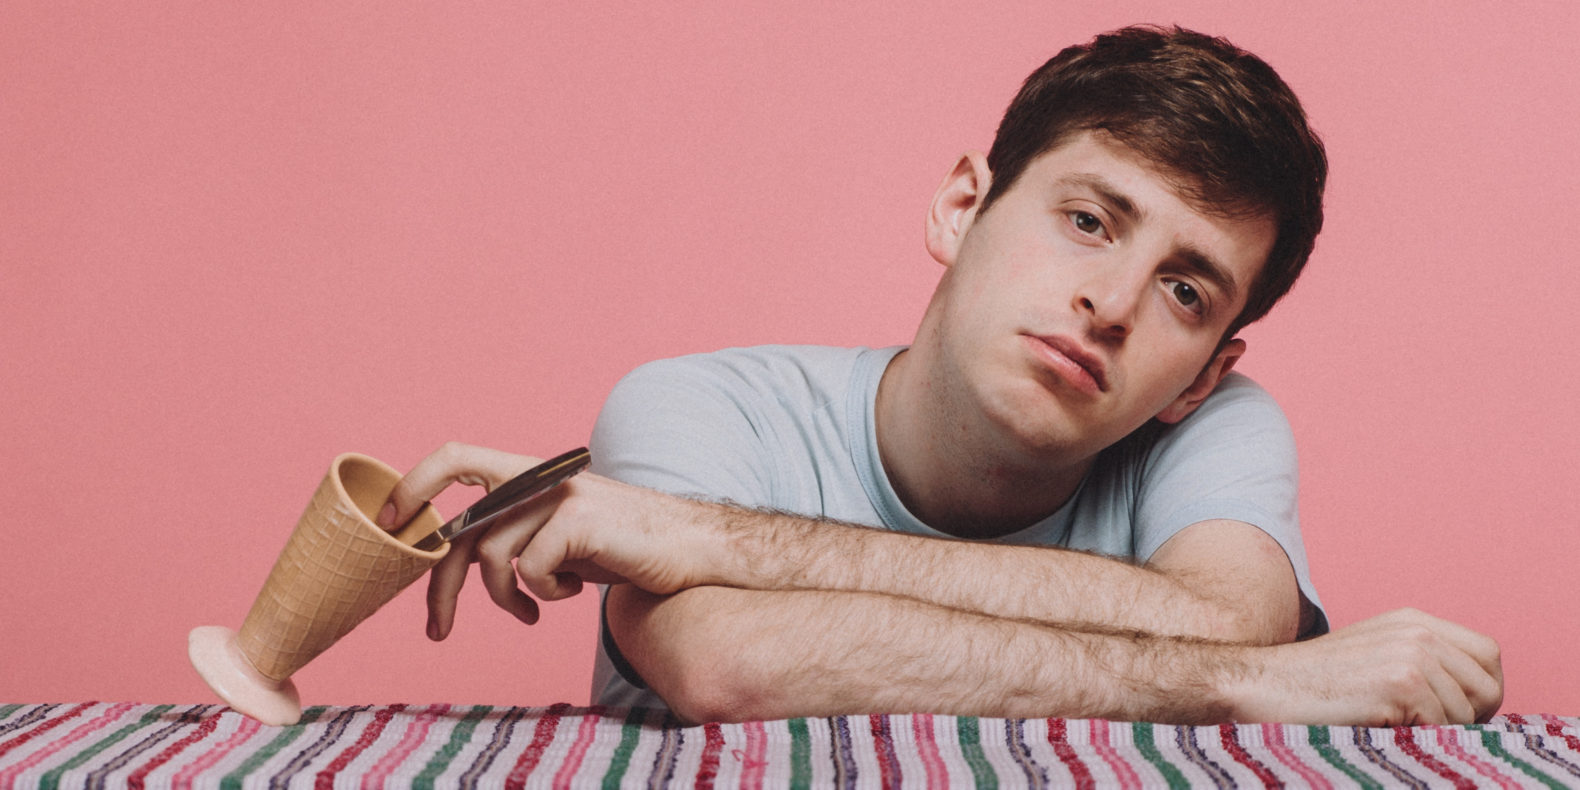 Alex Edelman feature image, Alex leaning on table with empty ice cream cup in front of pink background